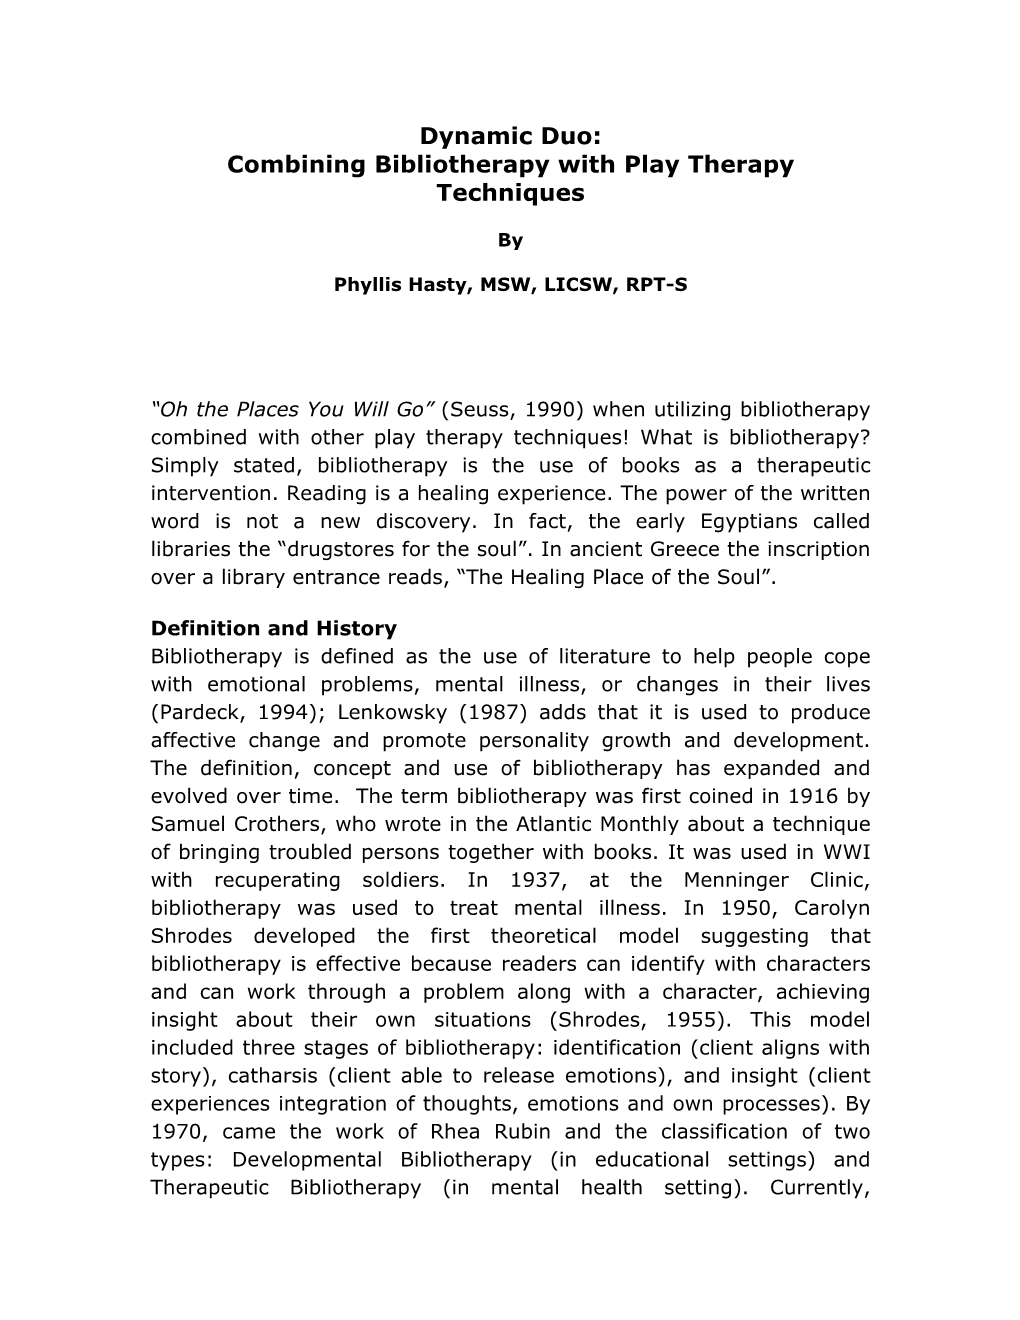 Combining Bibliotherapy with Play Therapy Techniques